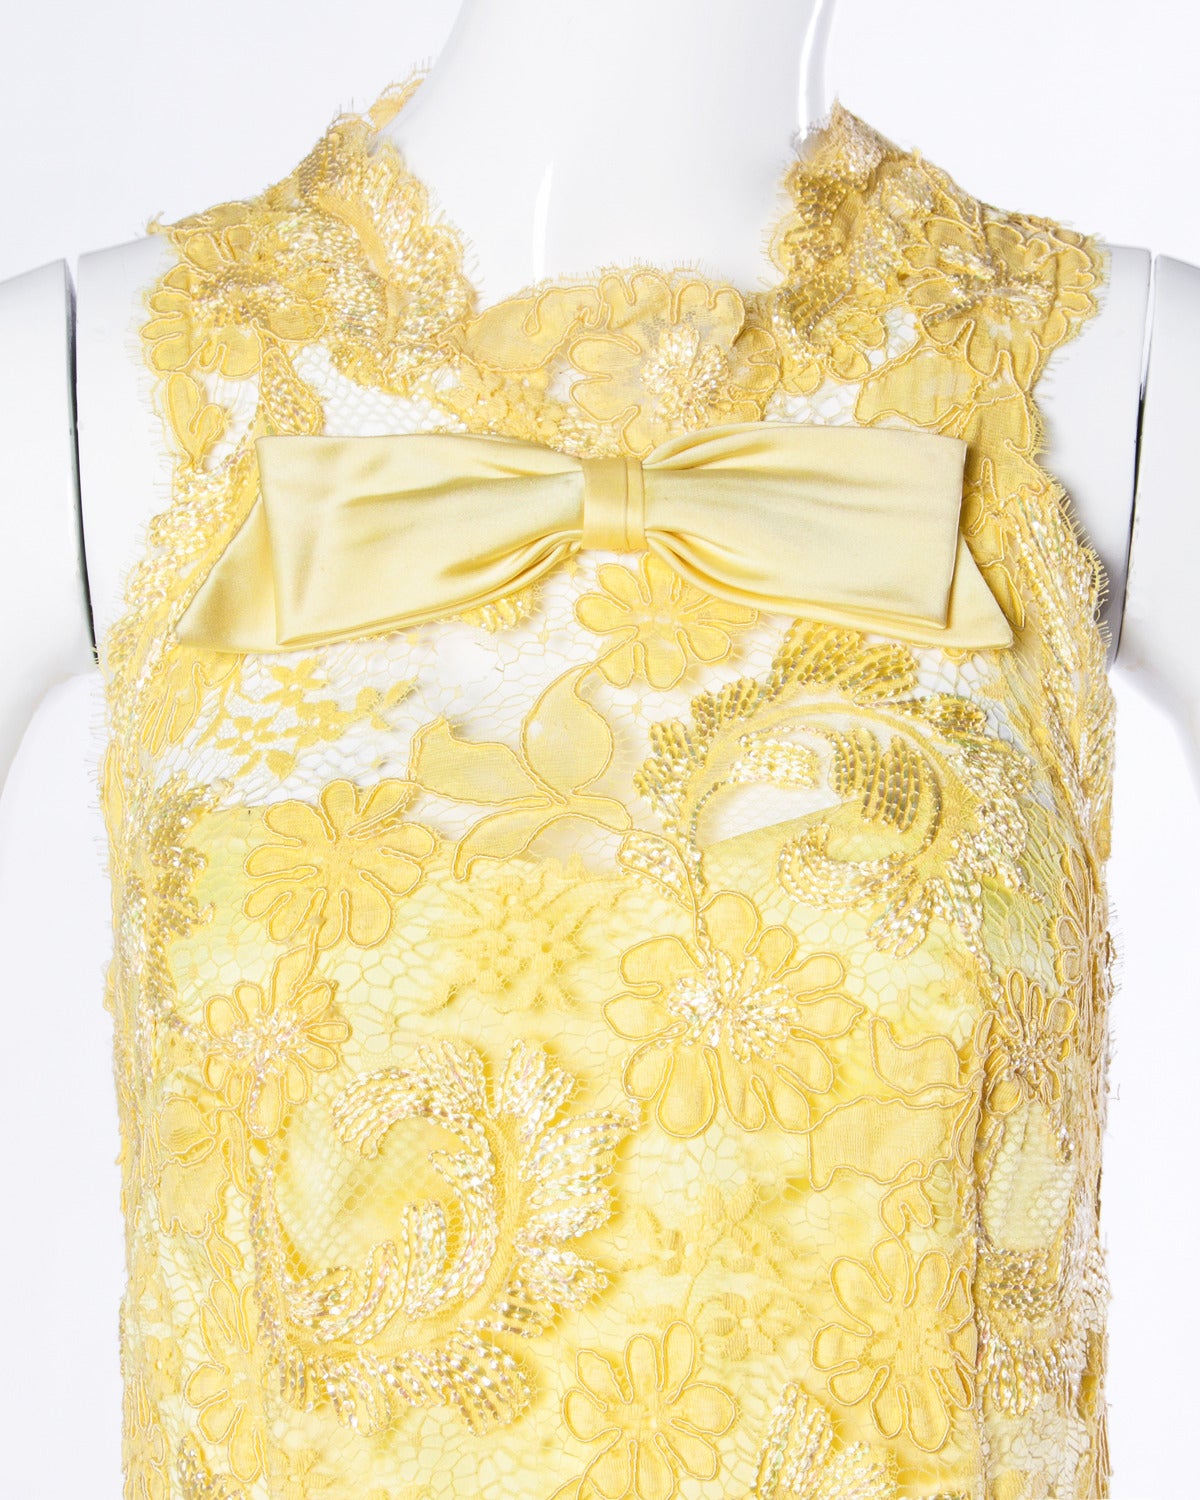 Gorgeous custom yellow lace shift dress with a bow detail and metallic thread accents. This dress is extremely well made and features couture hand stitching throughout the dress. The lace work is just stunning!

Details:

Partially Lined
Back